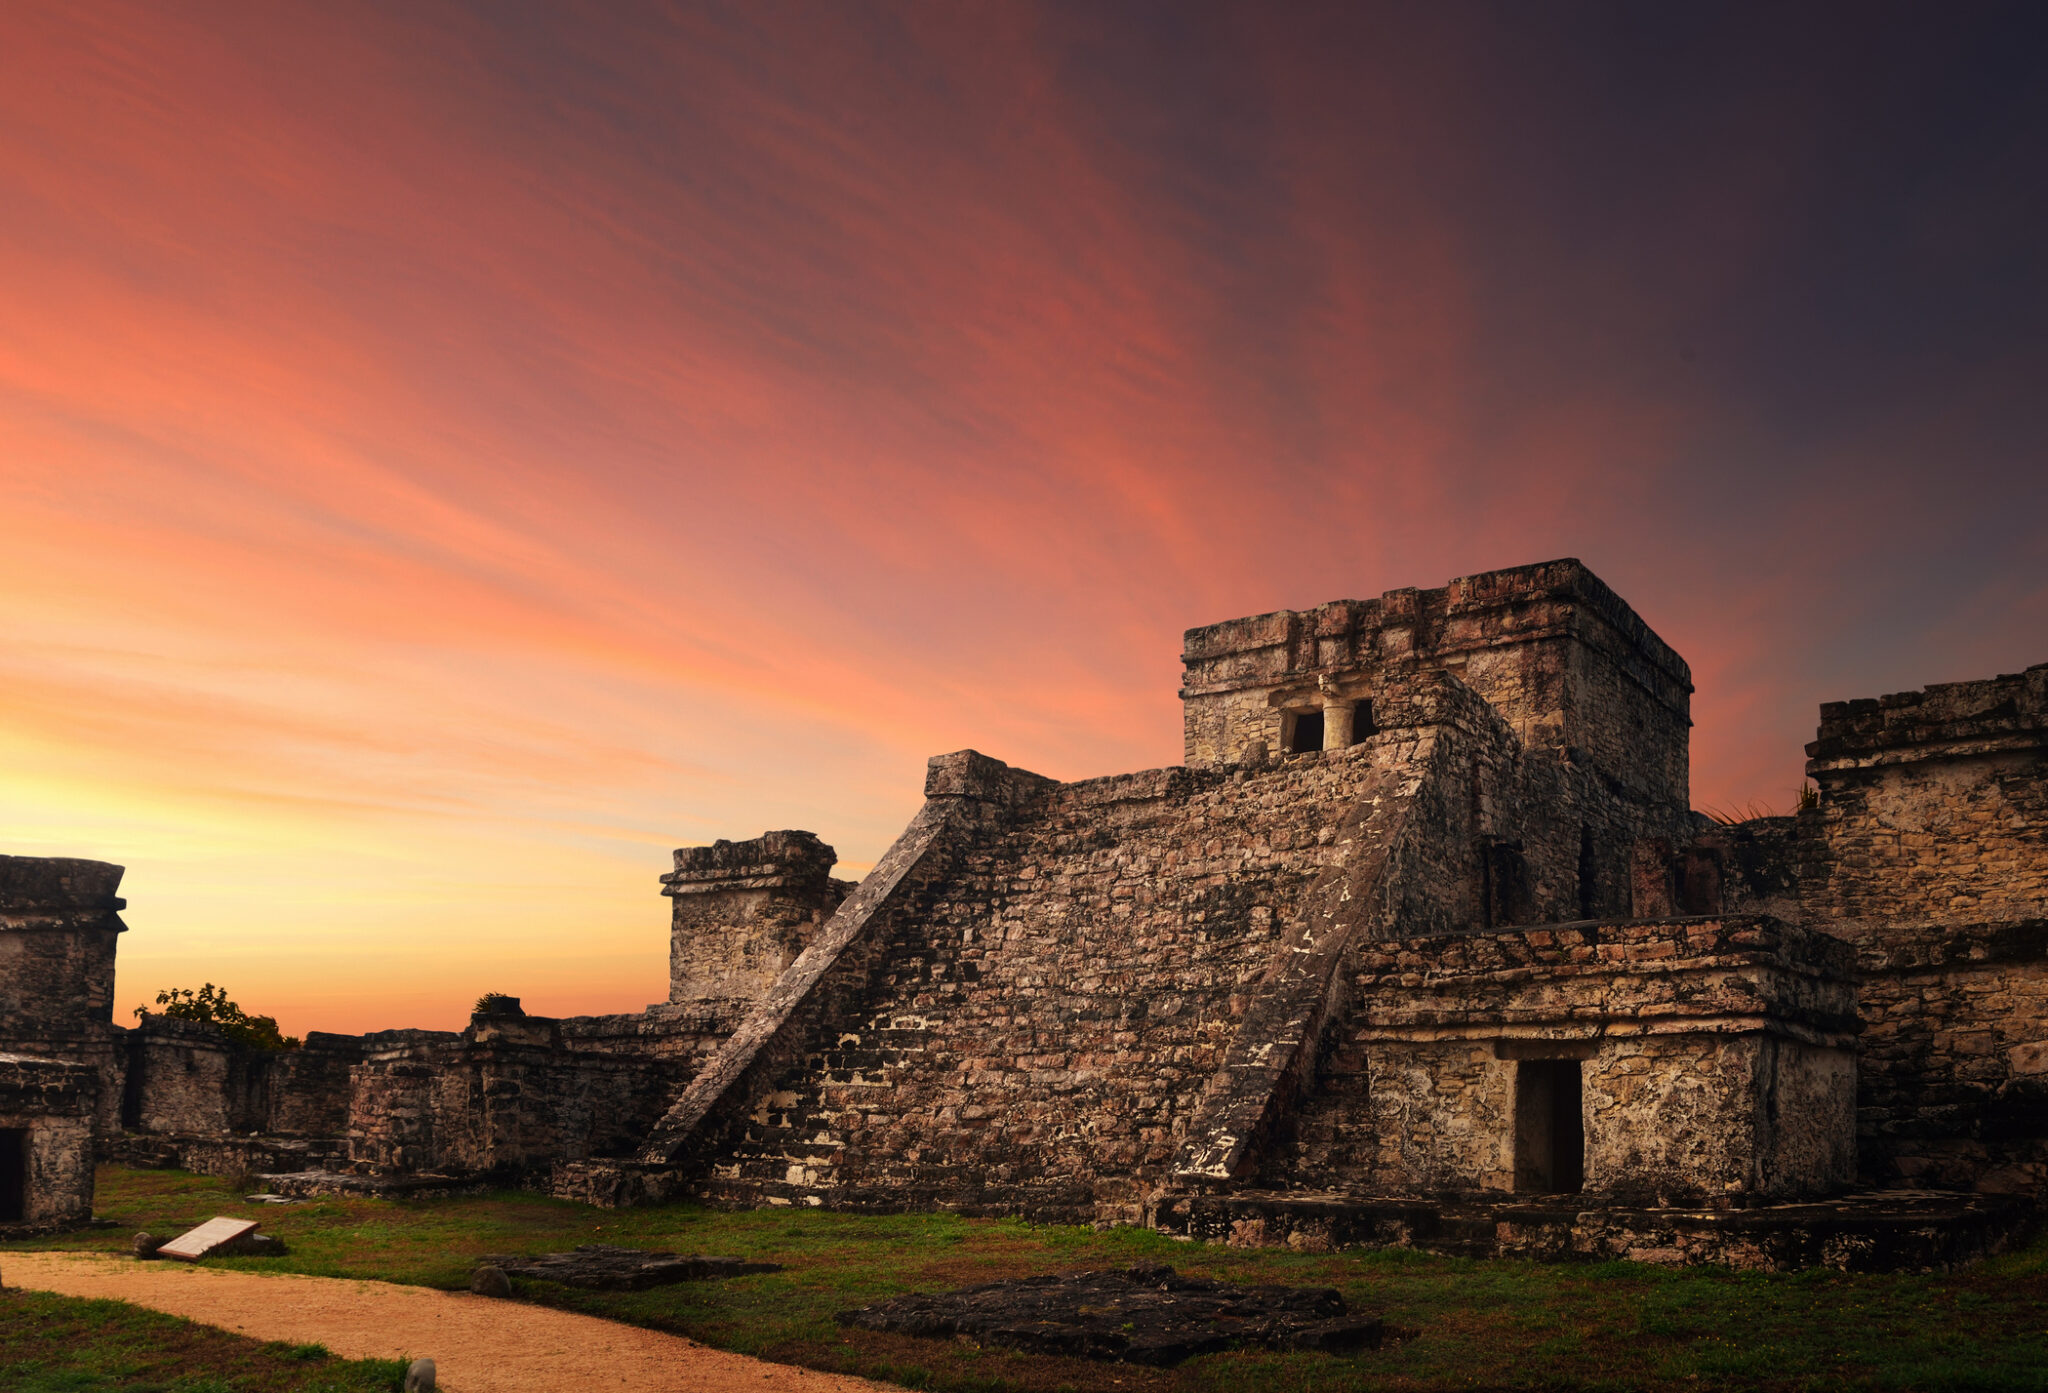 Castillo fortress in ancient Mayan city of Tulum